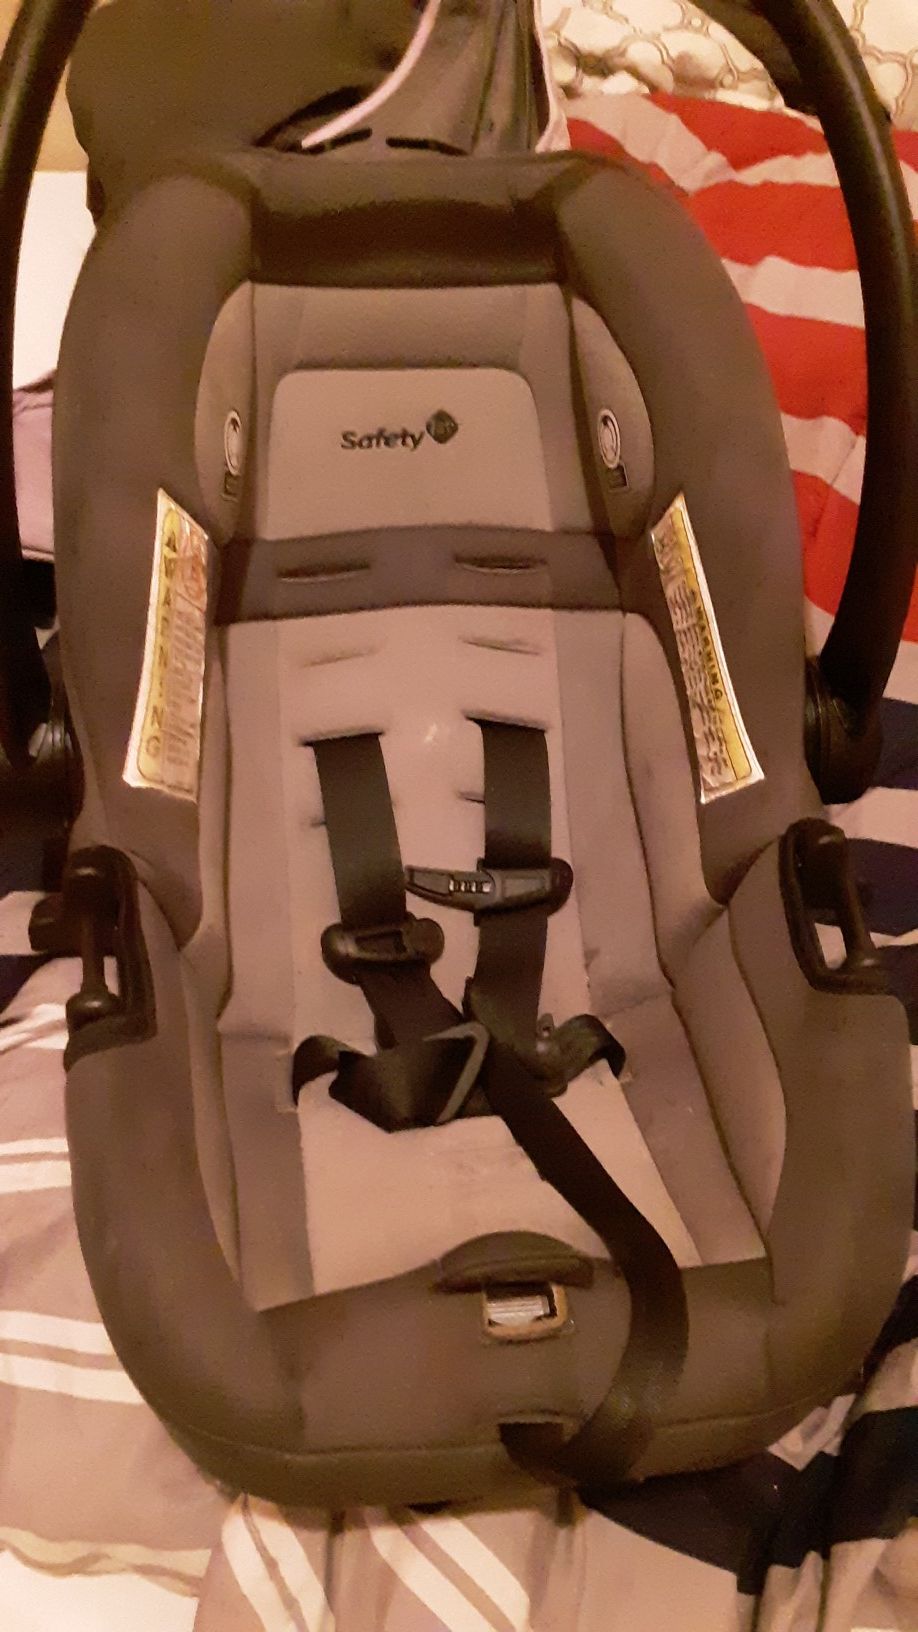 Safety 1st car seat